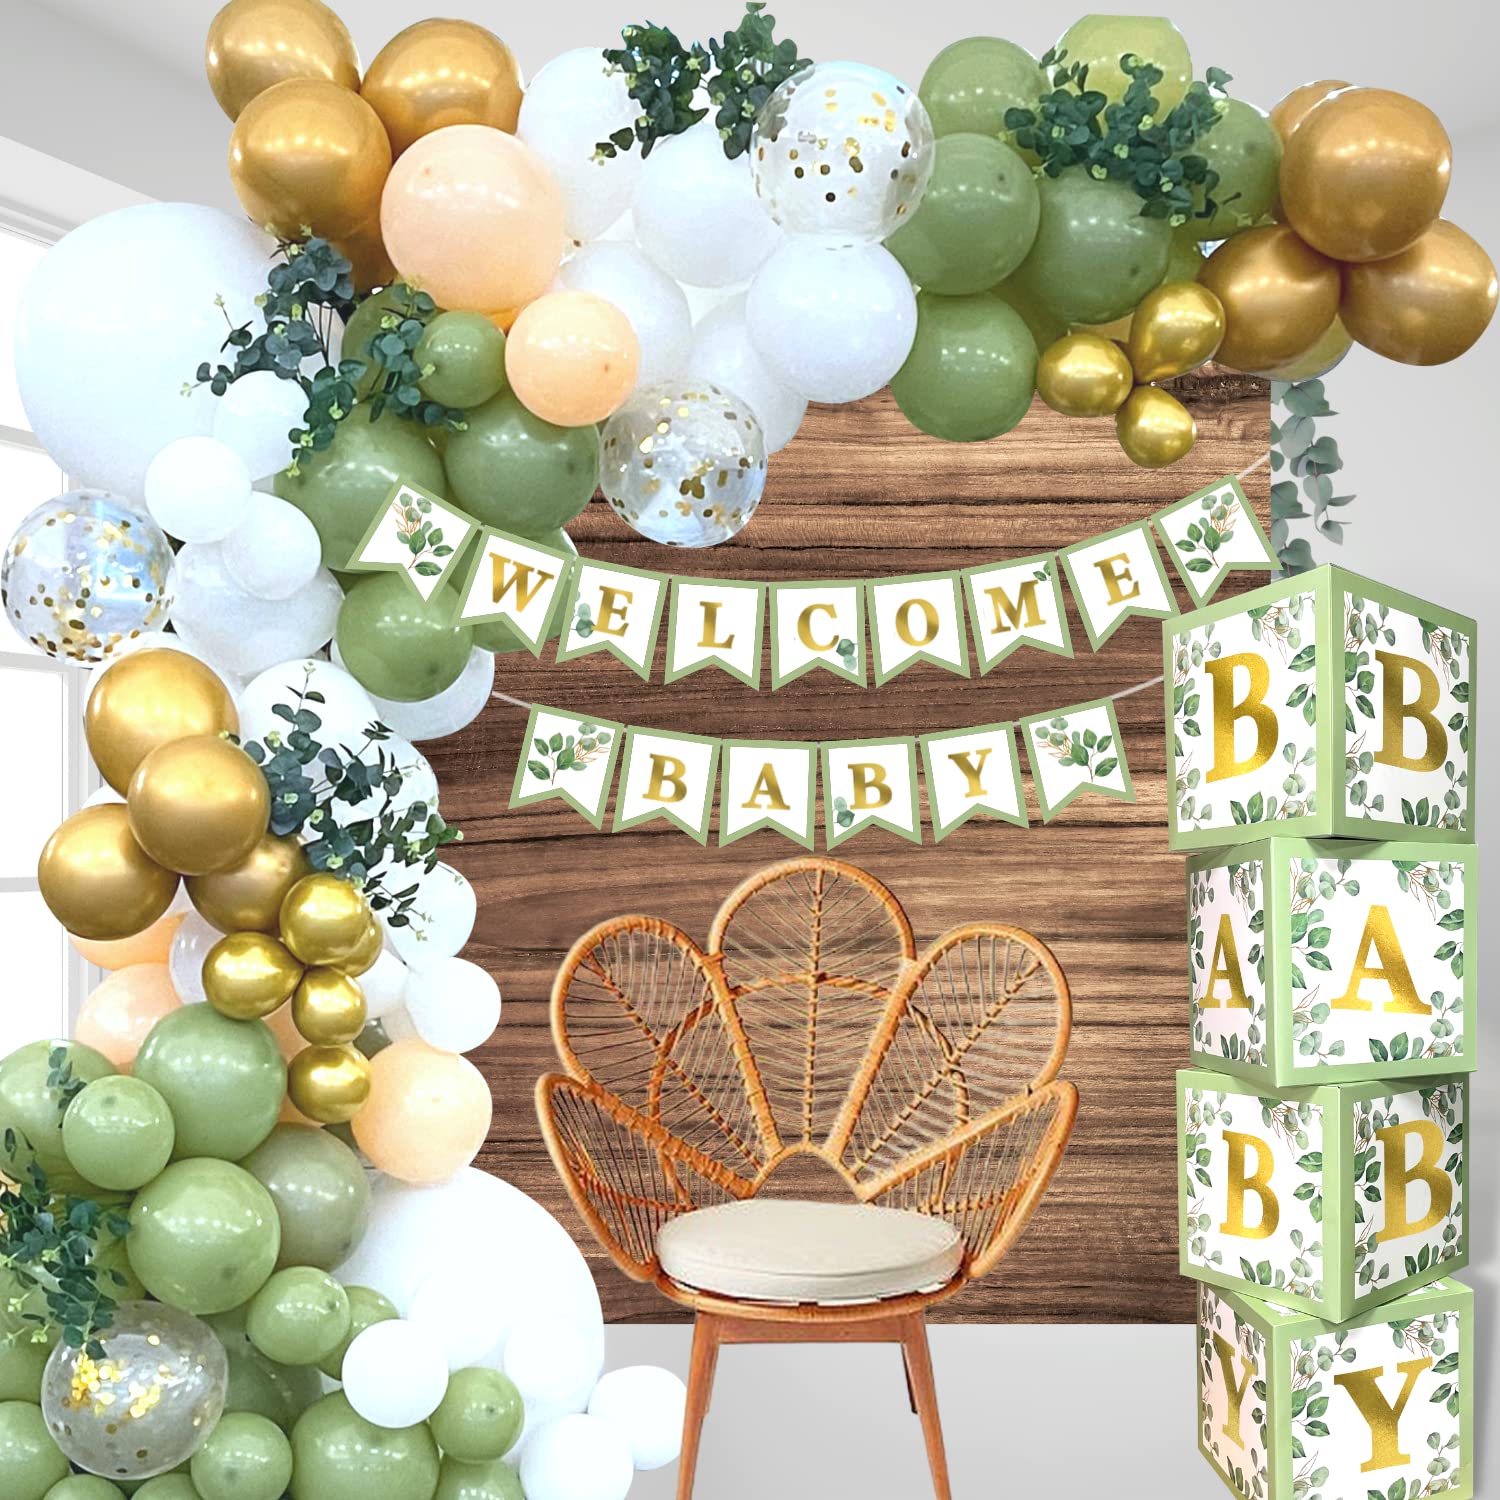 RainMeadow Premium Sage green Baby Shower Decorations, gender Neutral Mint Balloons garland and BABY Boxes, Welcome Baby Banner, Olive gree